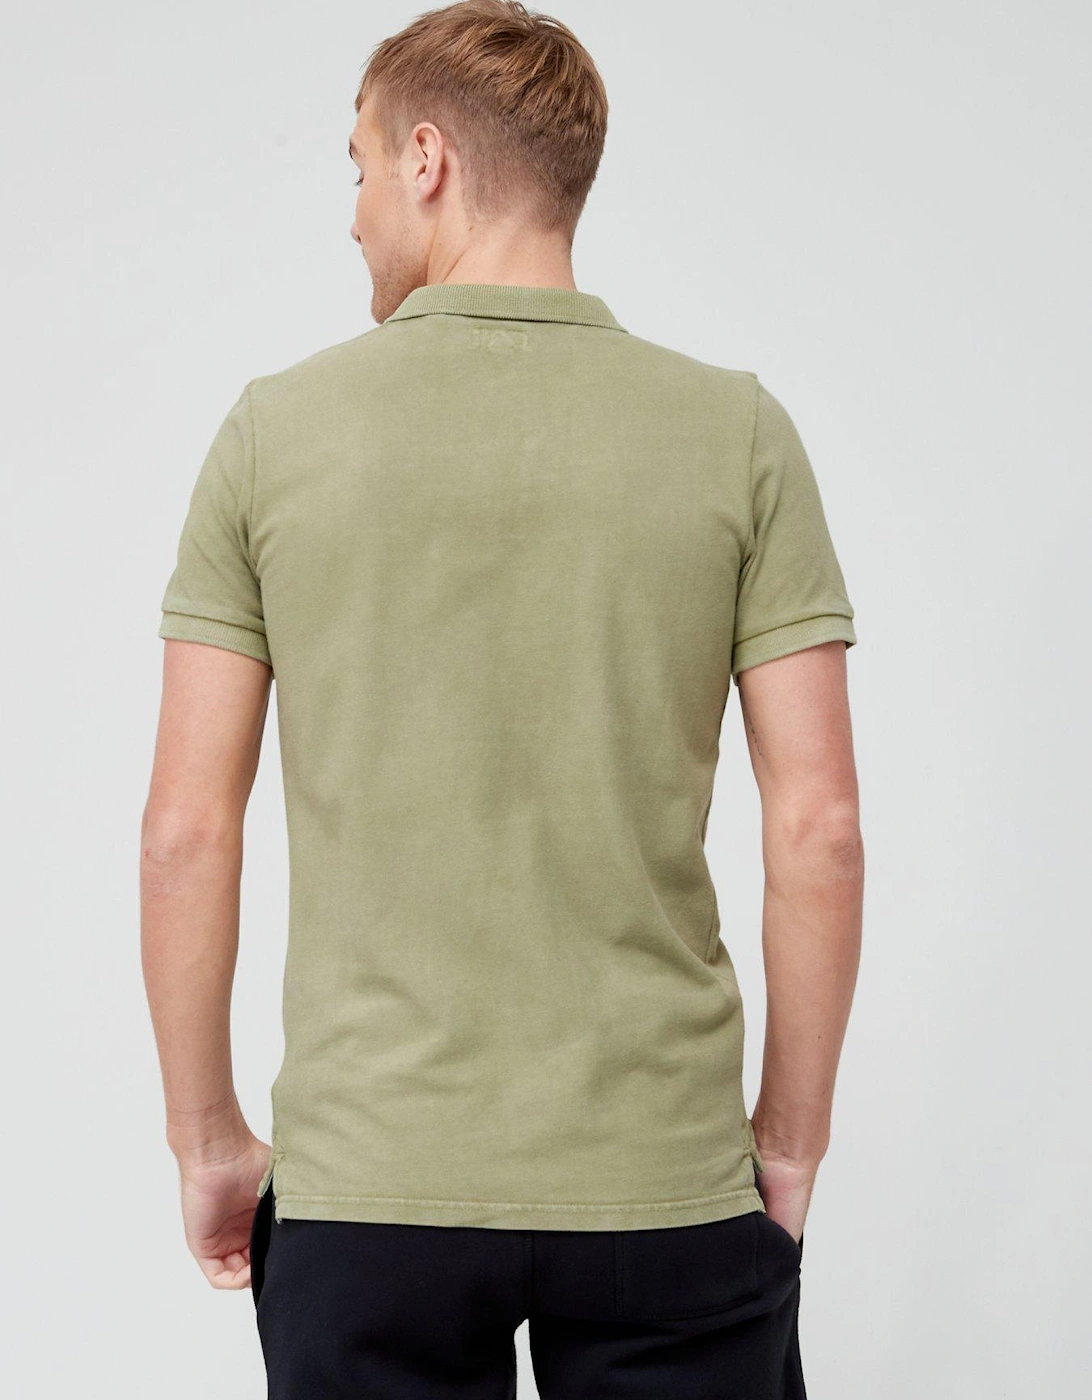 Destroyed Polo Shirt - Green